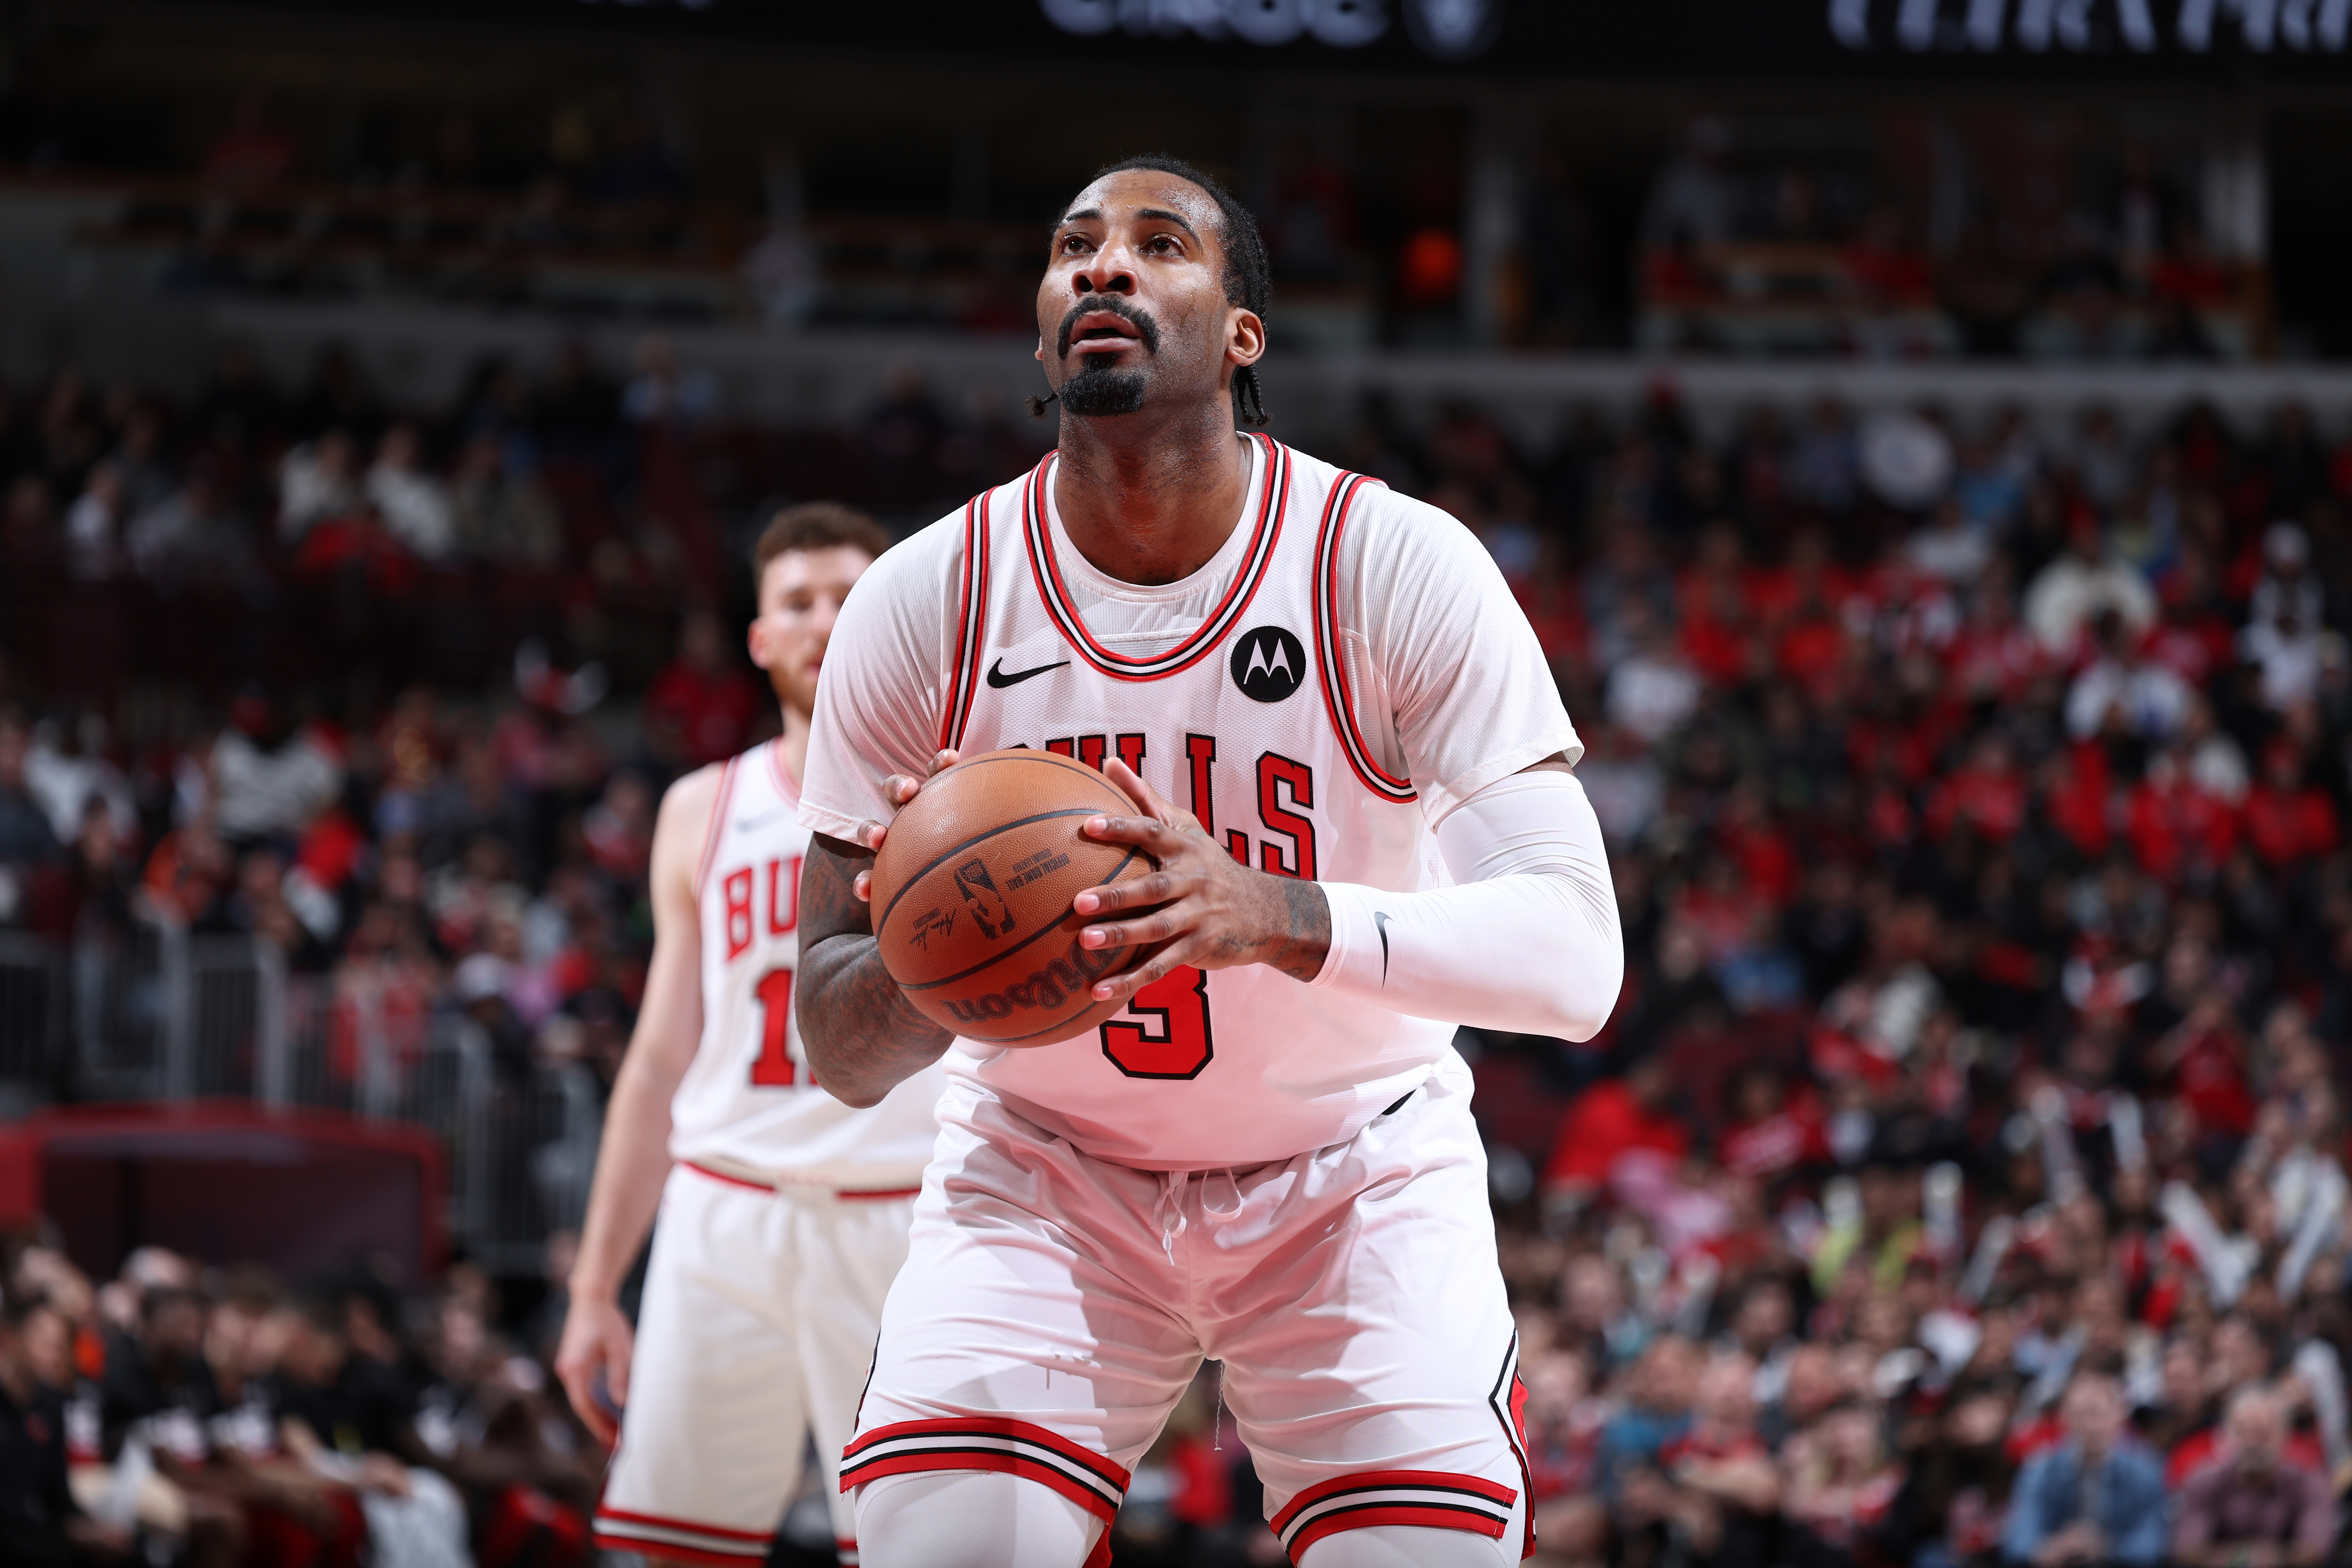 Chicago Bulls player in white uniform prepares to shoot a basketball during a game